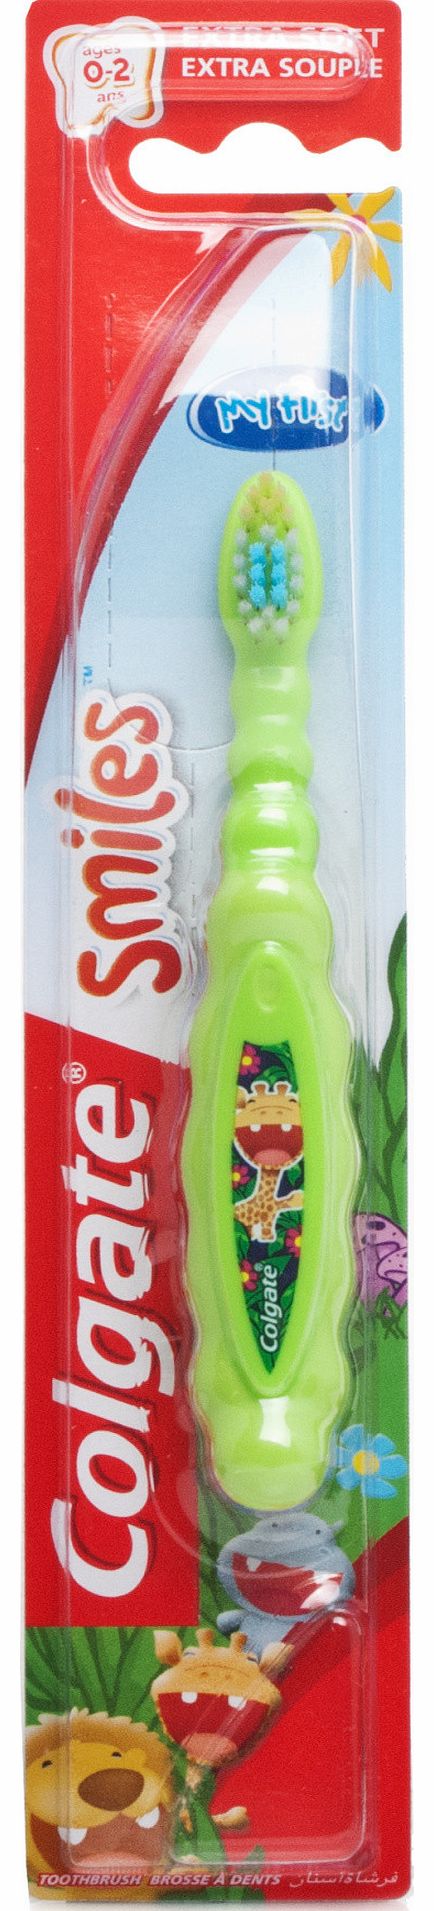 Smiles Infant Toothbrush Age 0-2 Yrs Boys